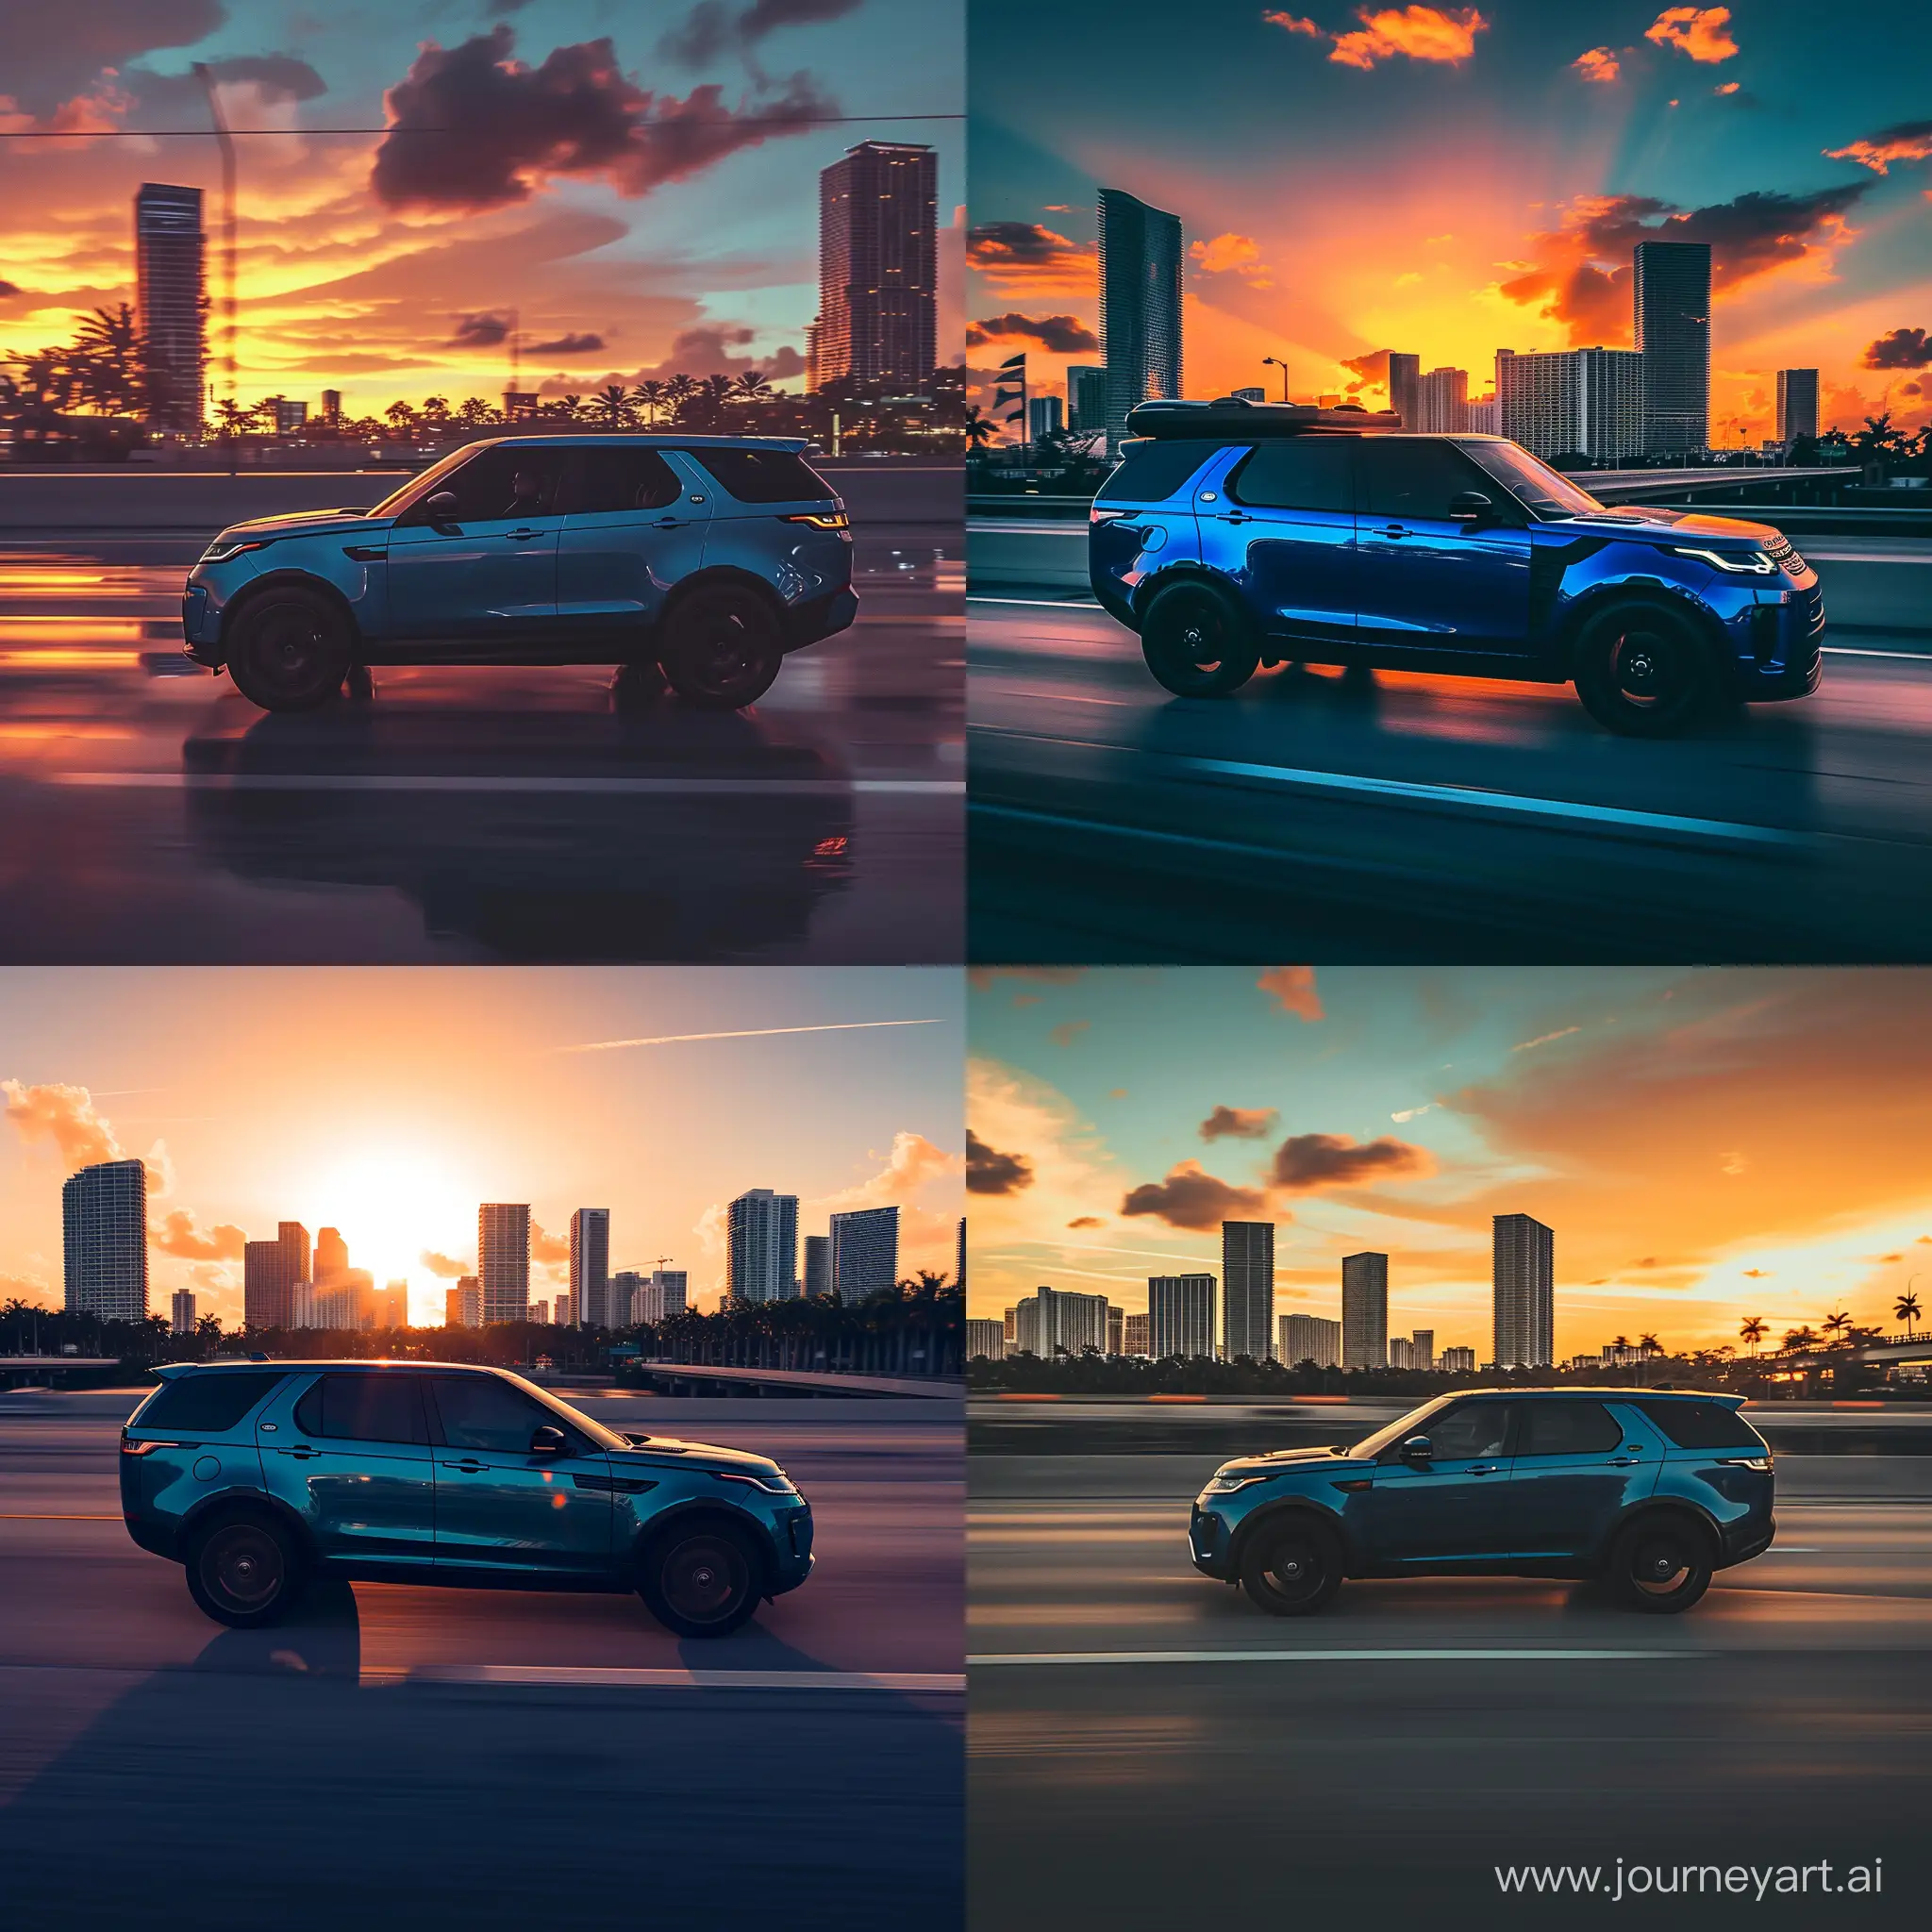 Sunset-Drive-Blue-Landrover-Discovery-2023-in-GTA-Style-on-Miami-City-Highway